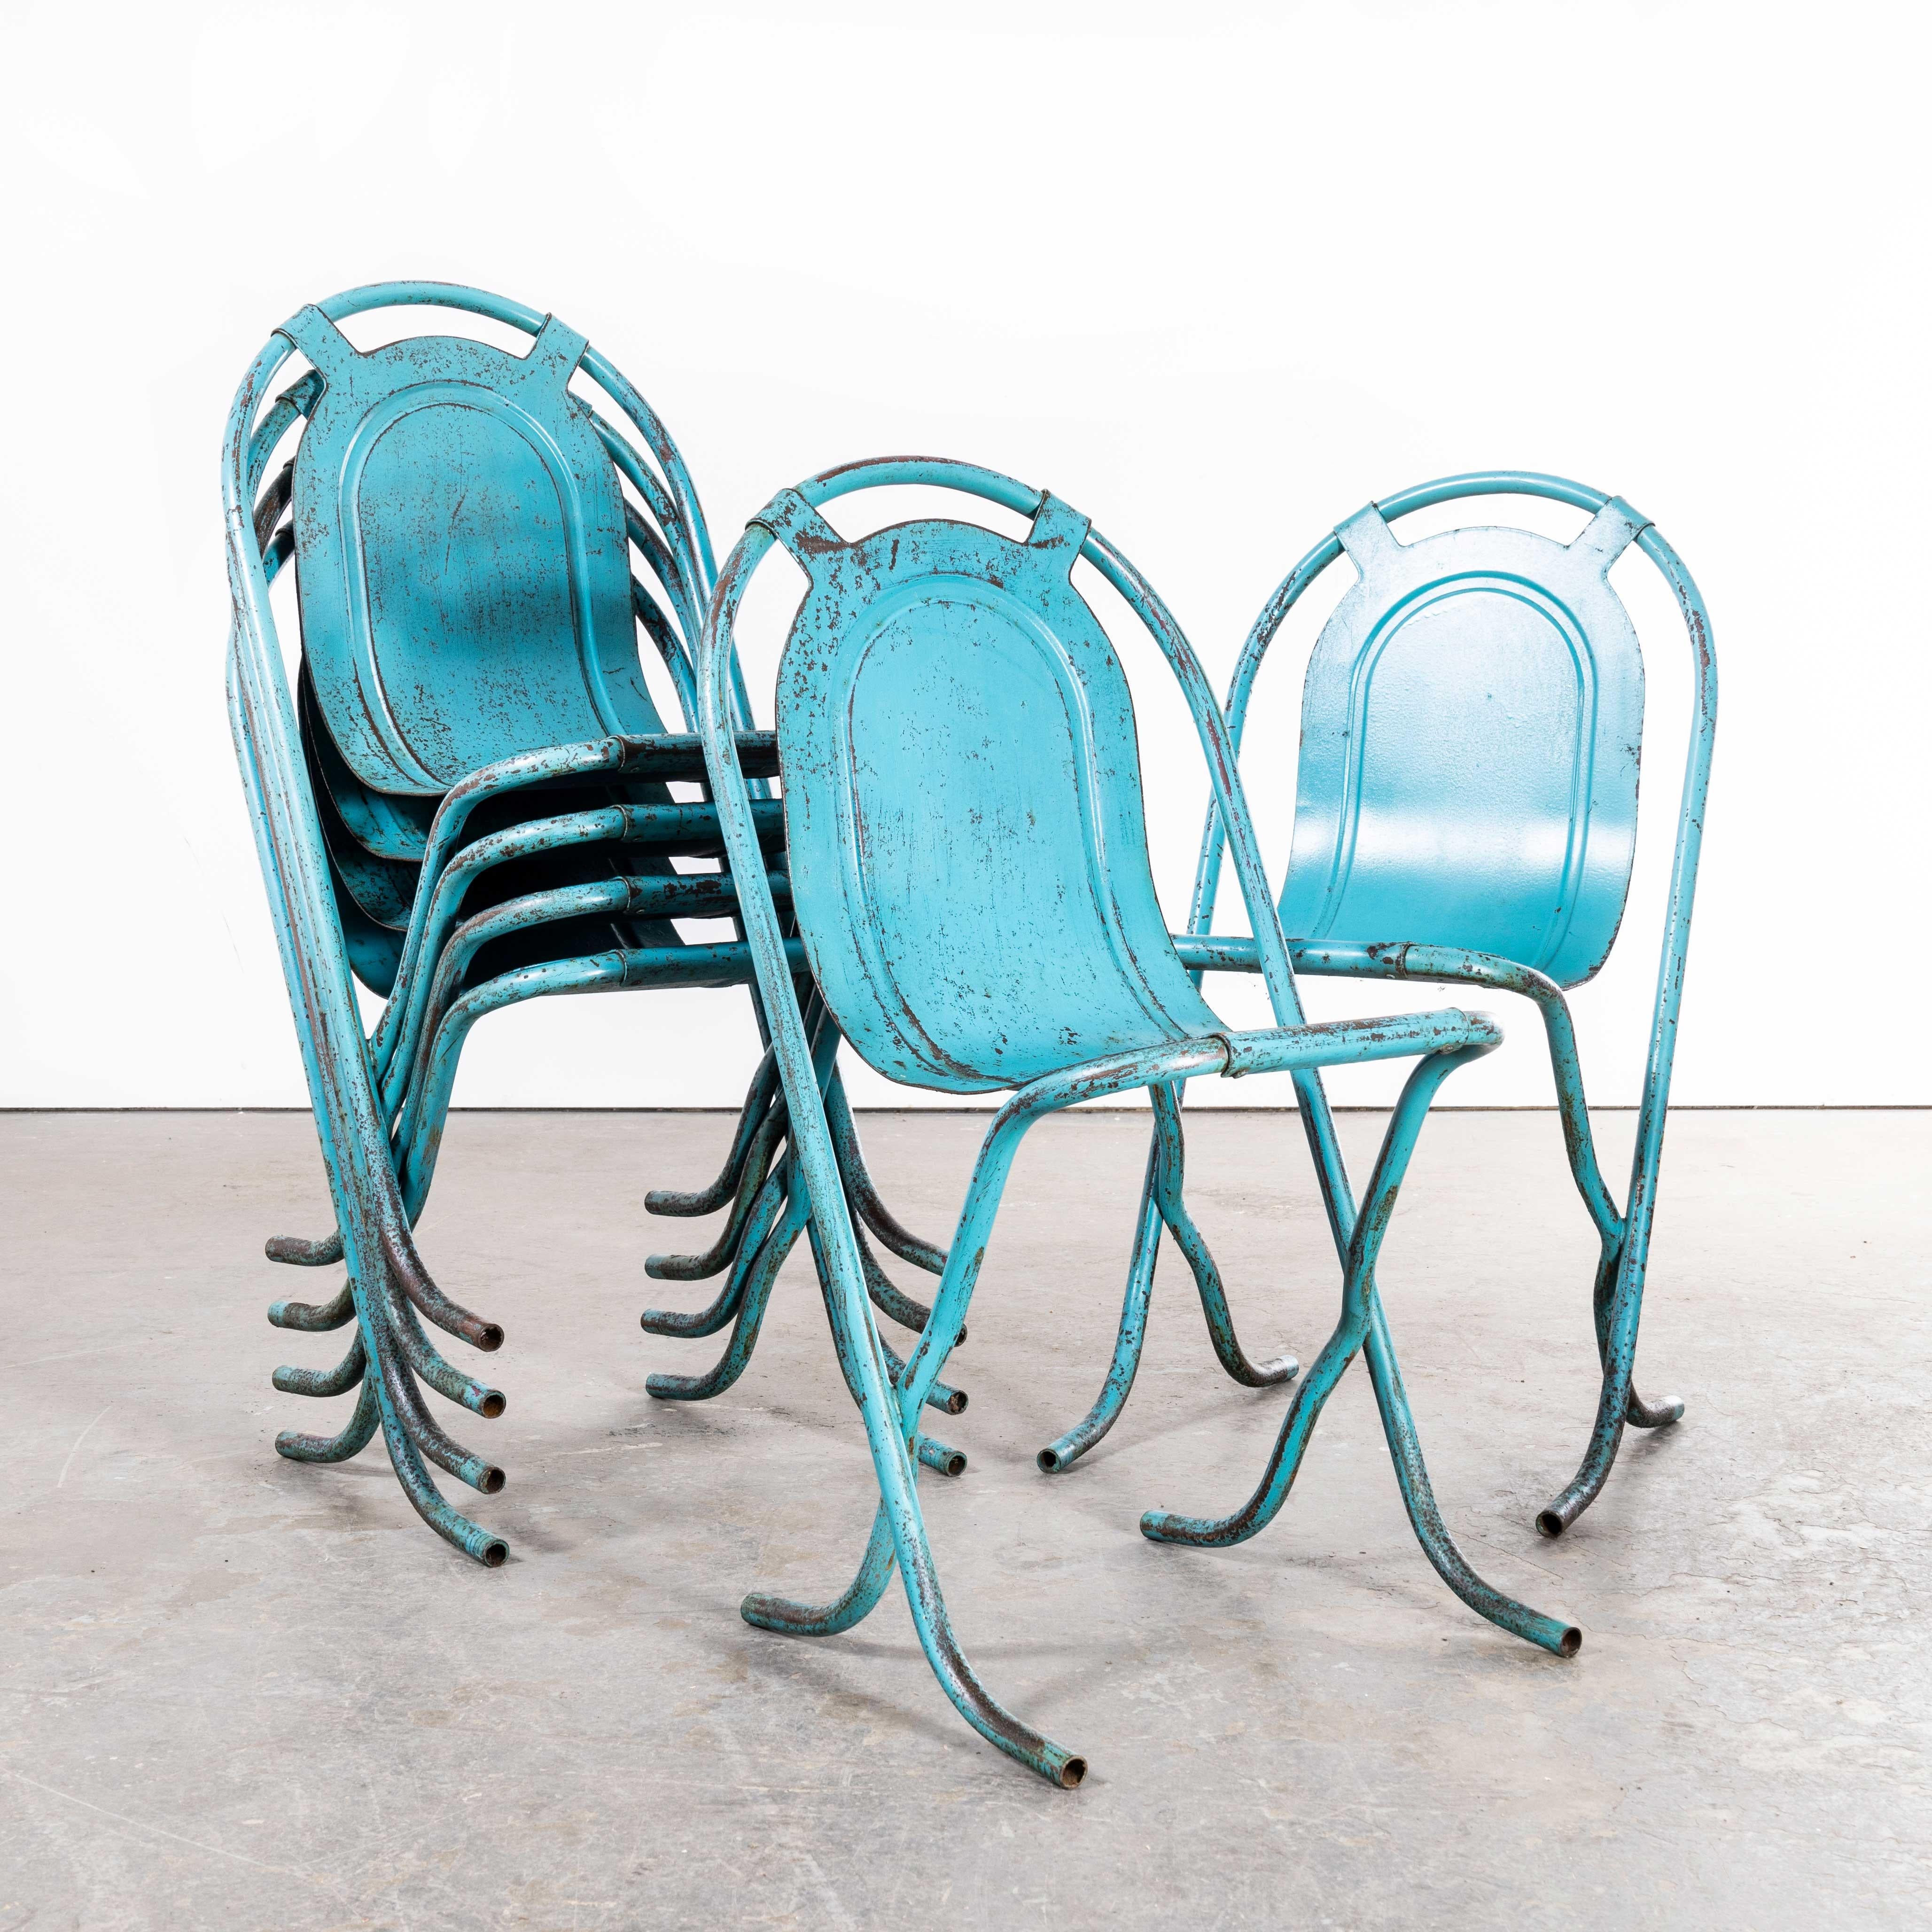 Stainless Steel 1940s Original British Stak a Bye Chairs, Blue, Quantity Available